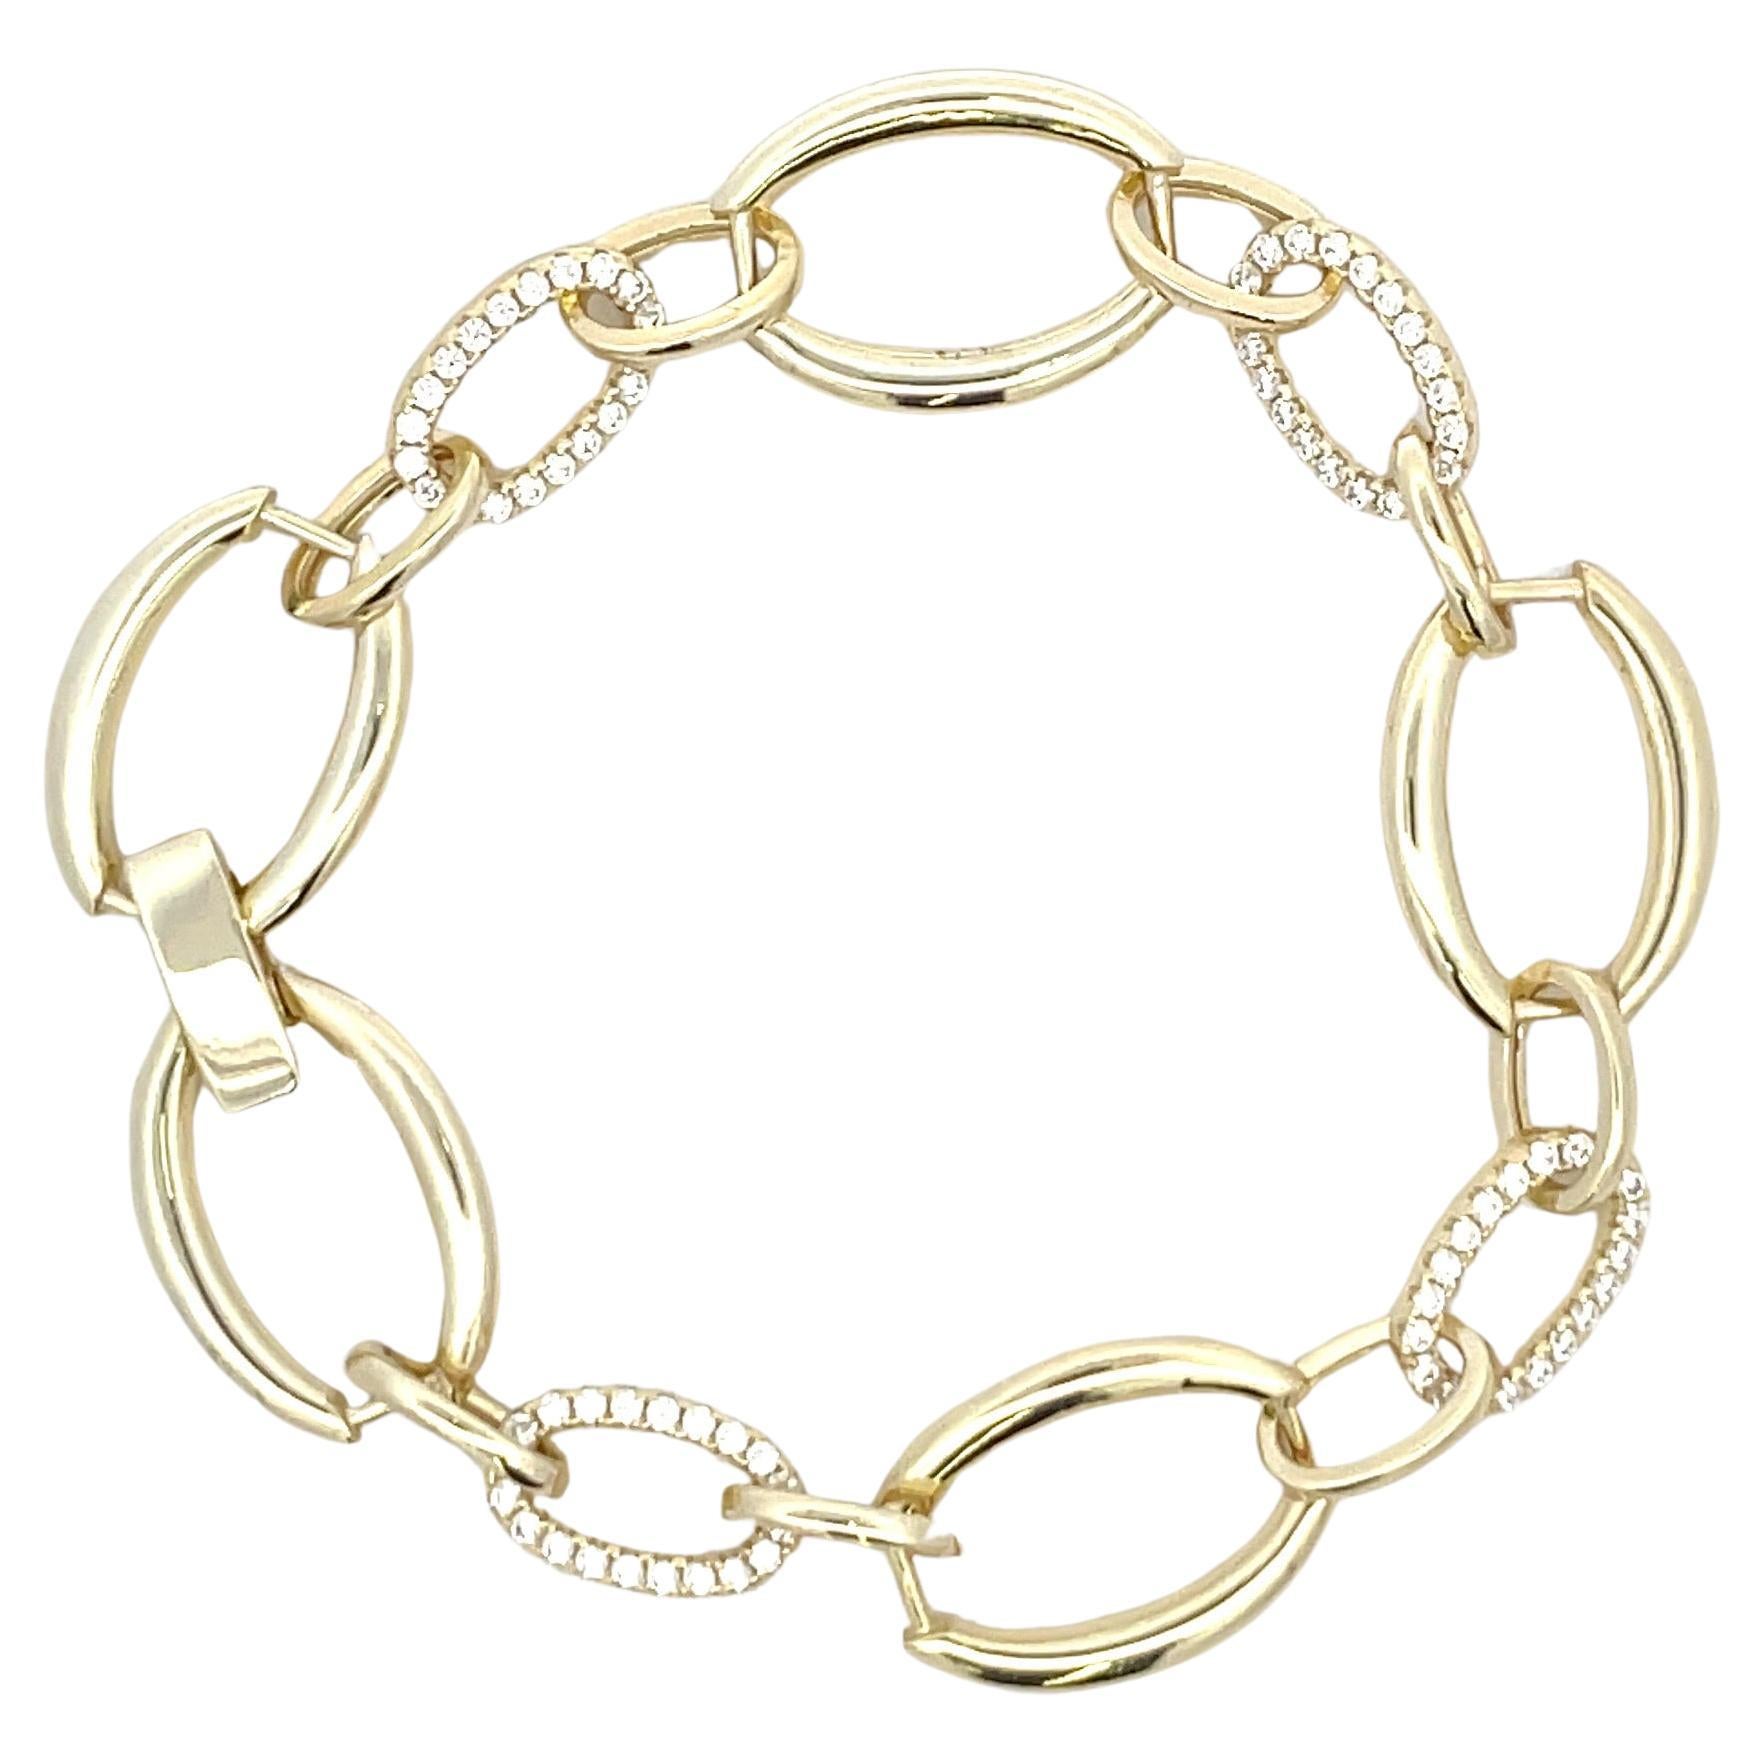 Gold plated sterling silver bracelet featuring high polished and cubic zirconia links with a fold-over clasp. 
Great quality, will never tarnish! 